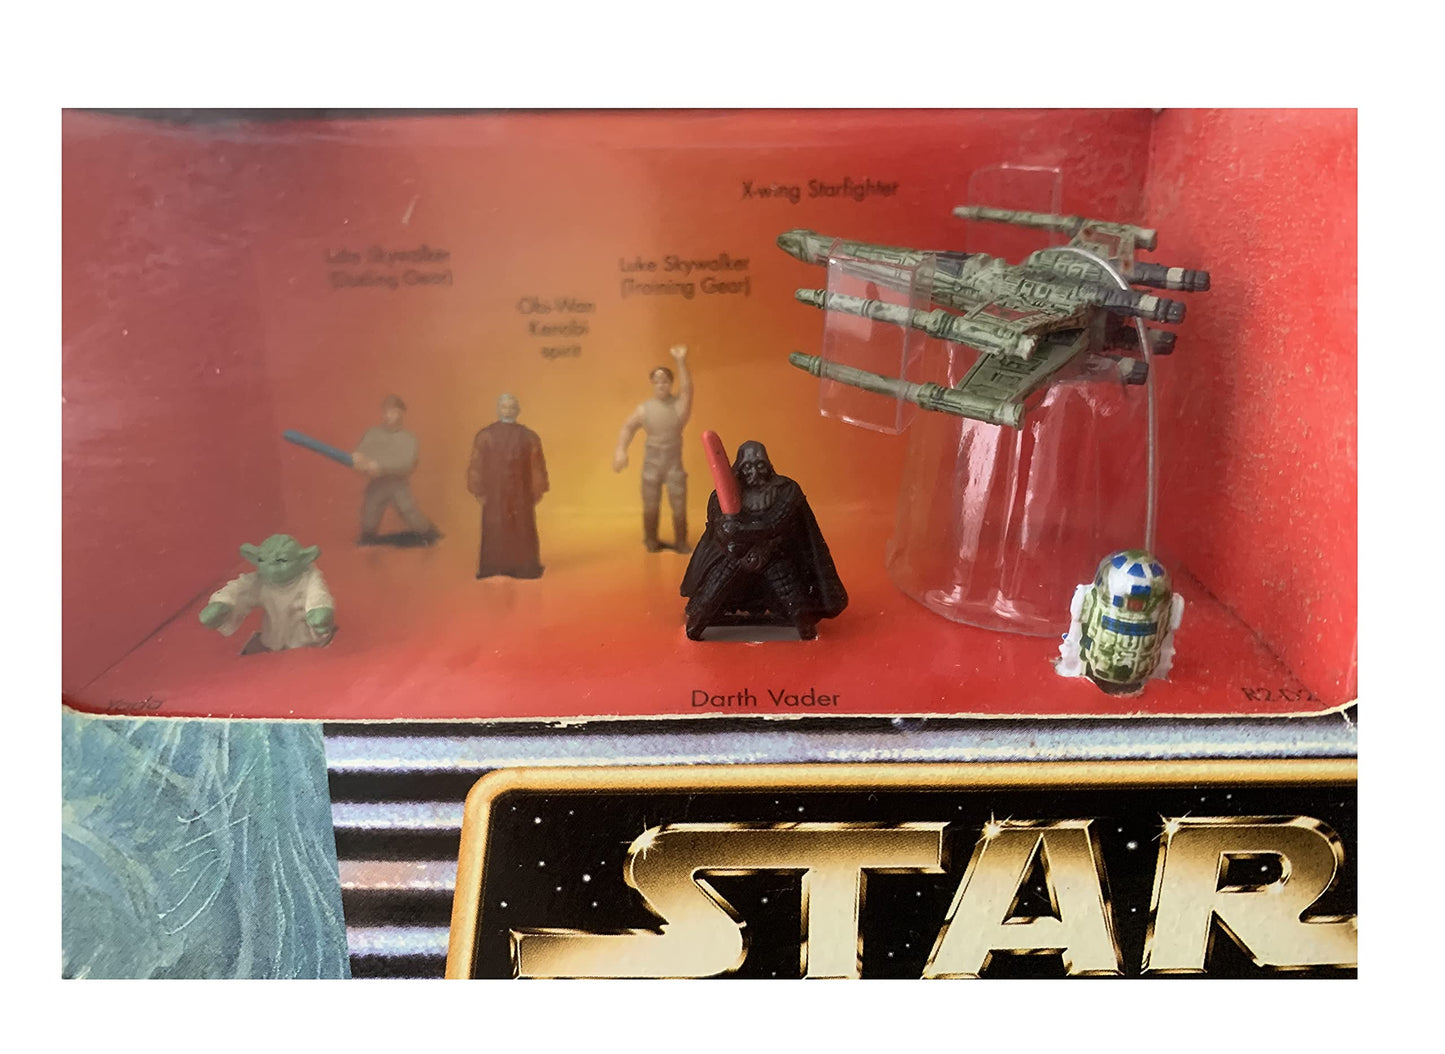 Vintage Ultra Rare Galoob 1998 Star Wars Micro Machines Yoda / Swamp Planet Dagobah Action Play Set - Brand New Factory Sealed Shop Stock Room Find